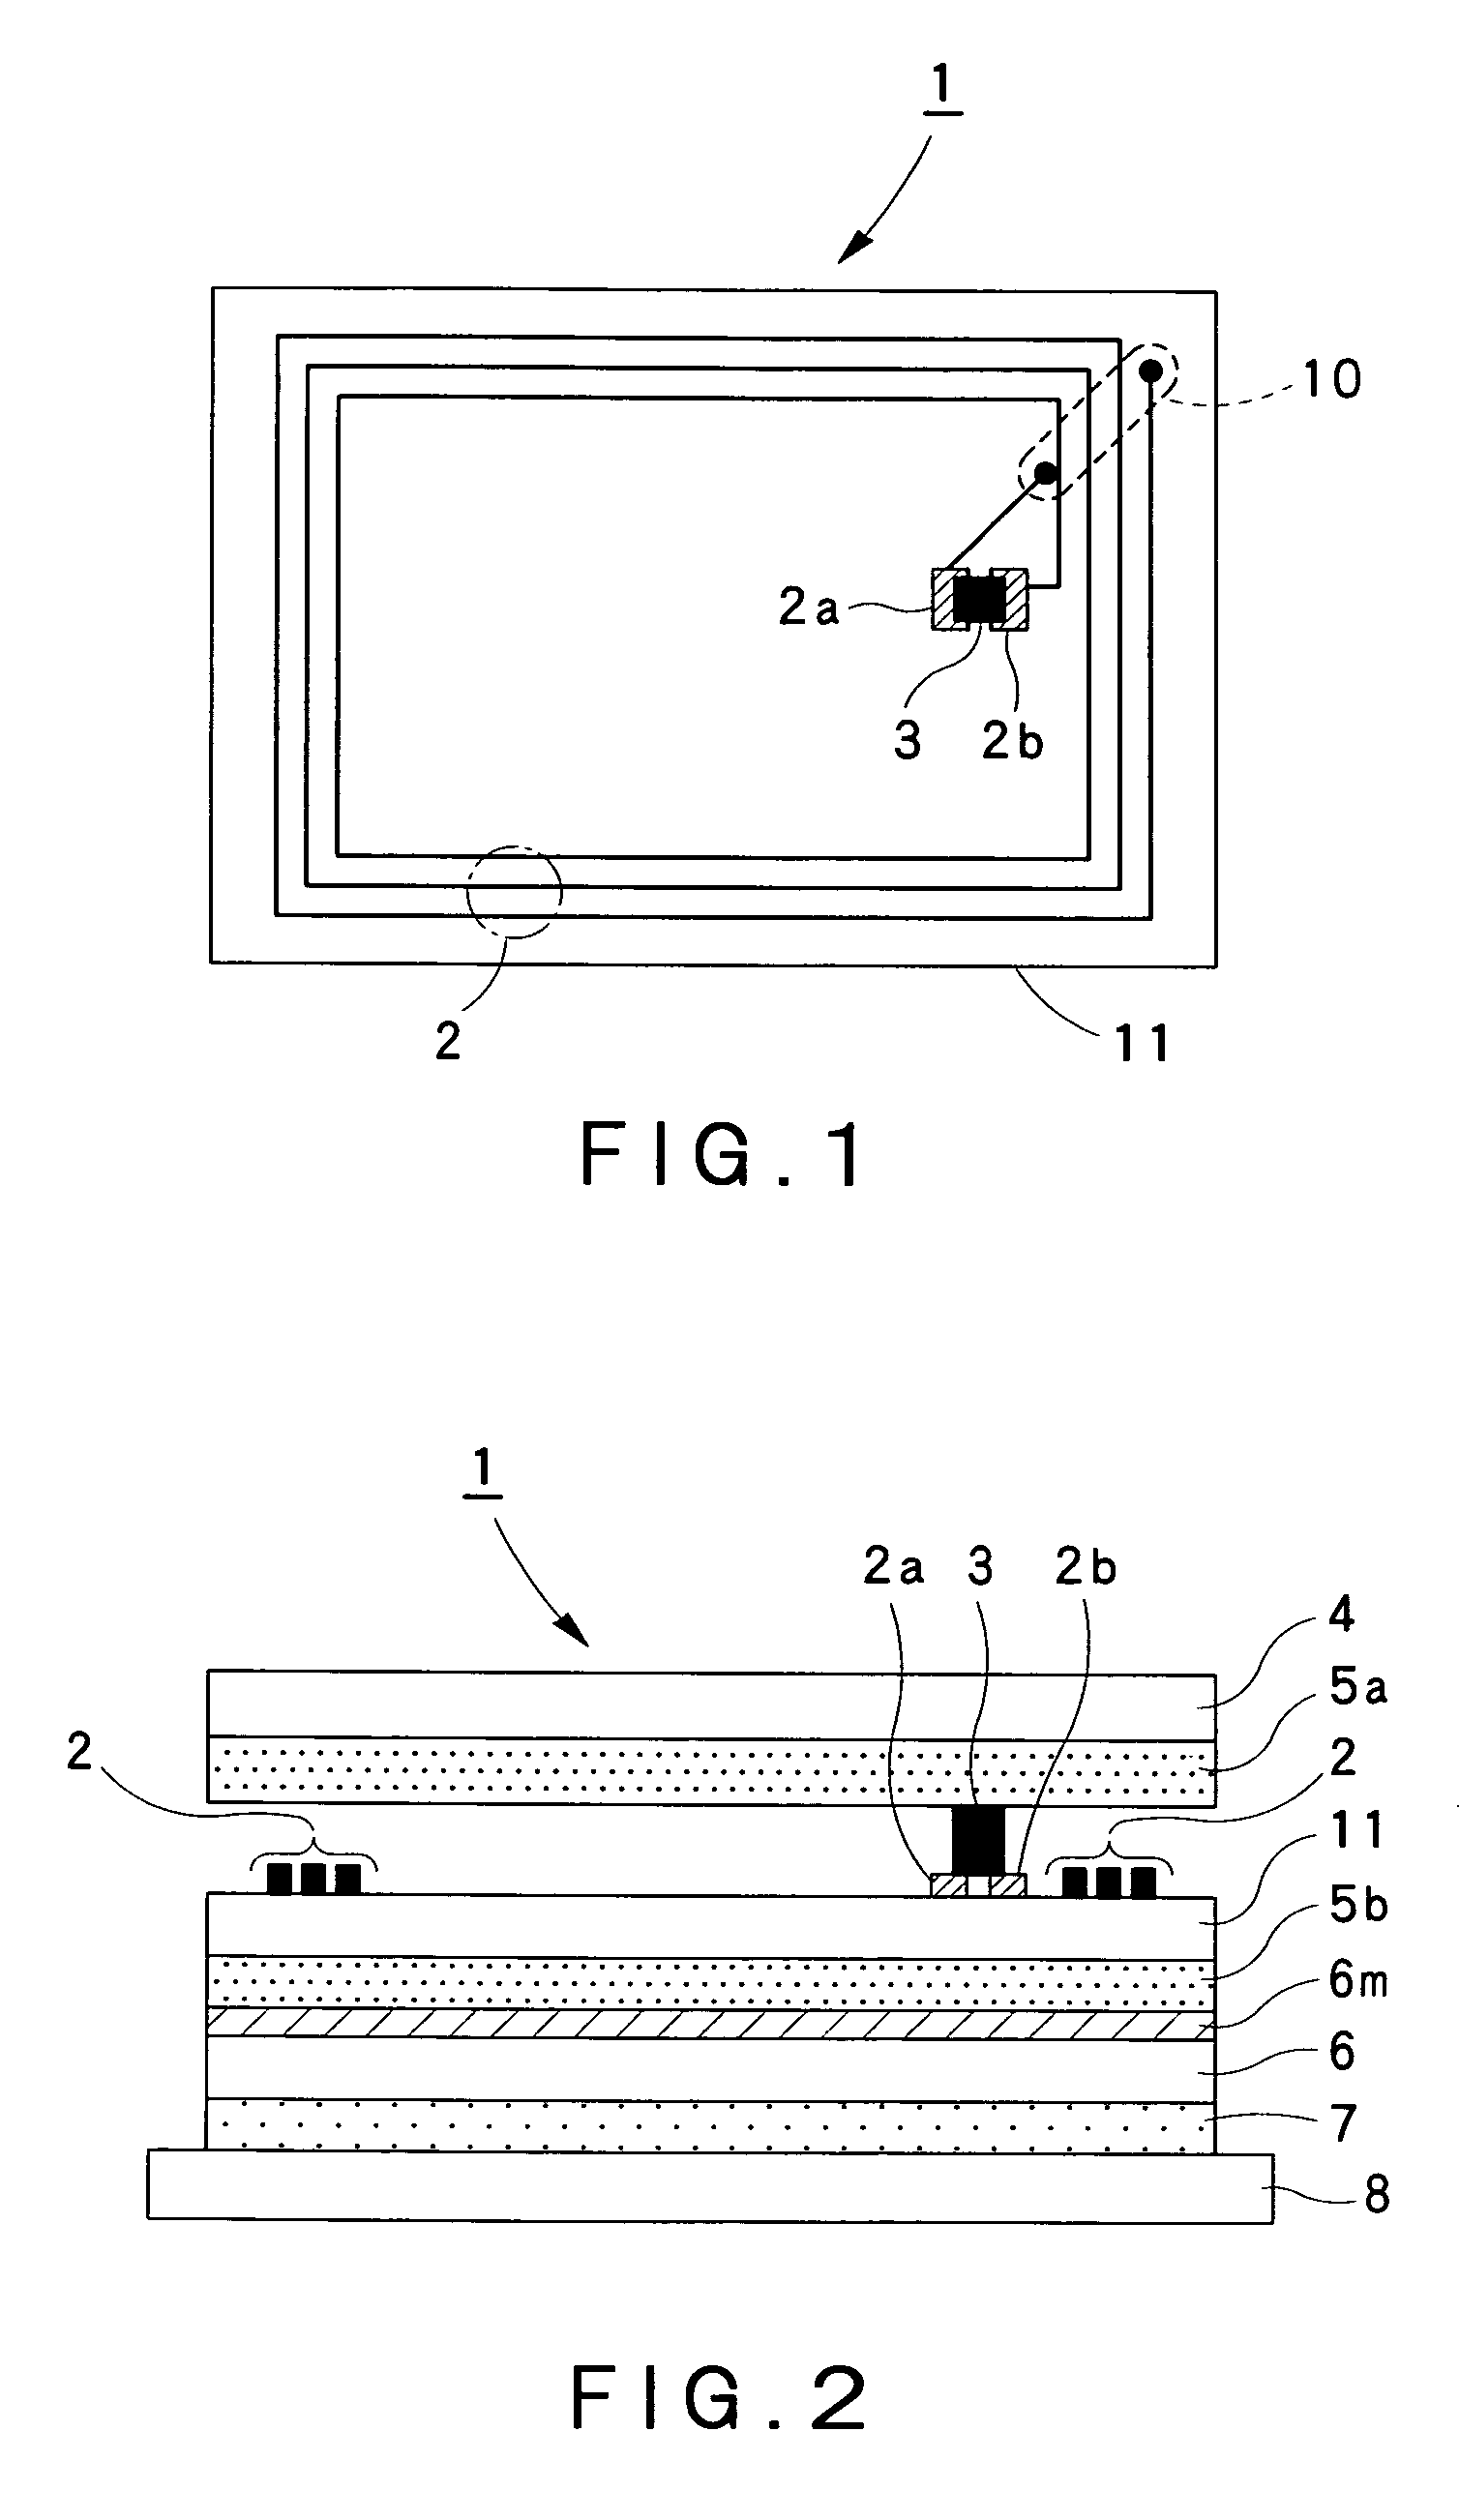 Noncontract IC tag with non-conductive metal film